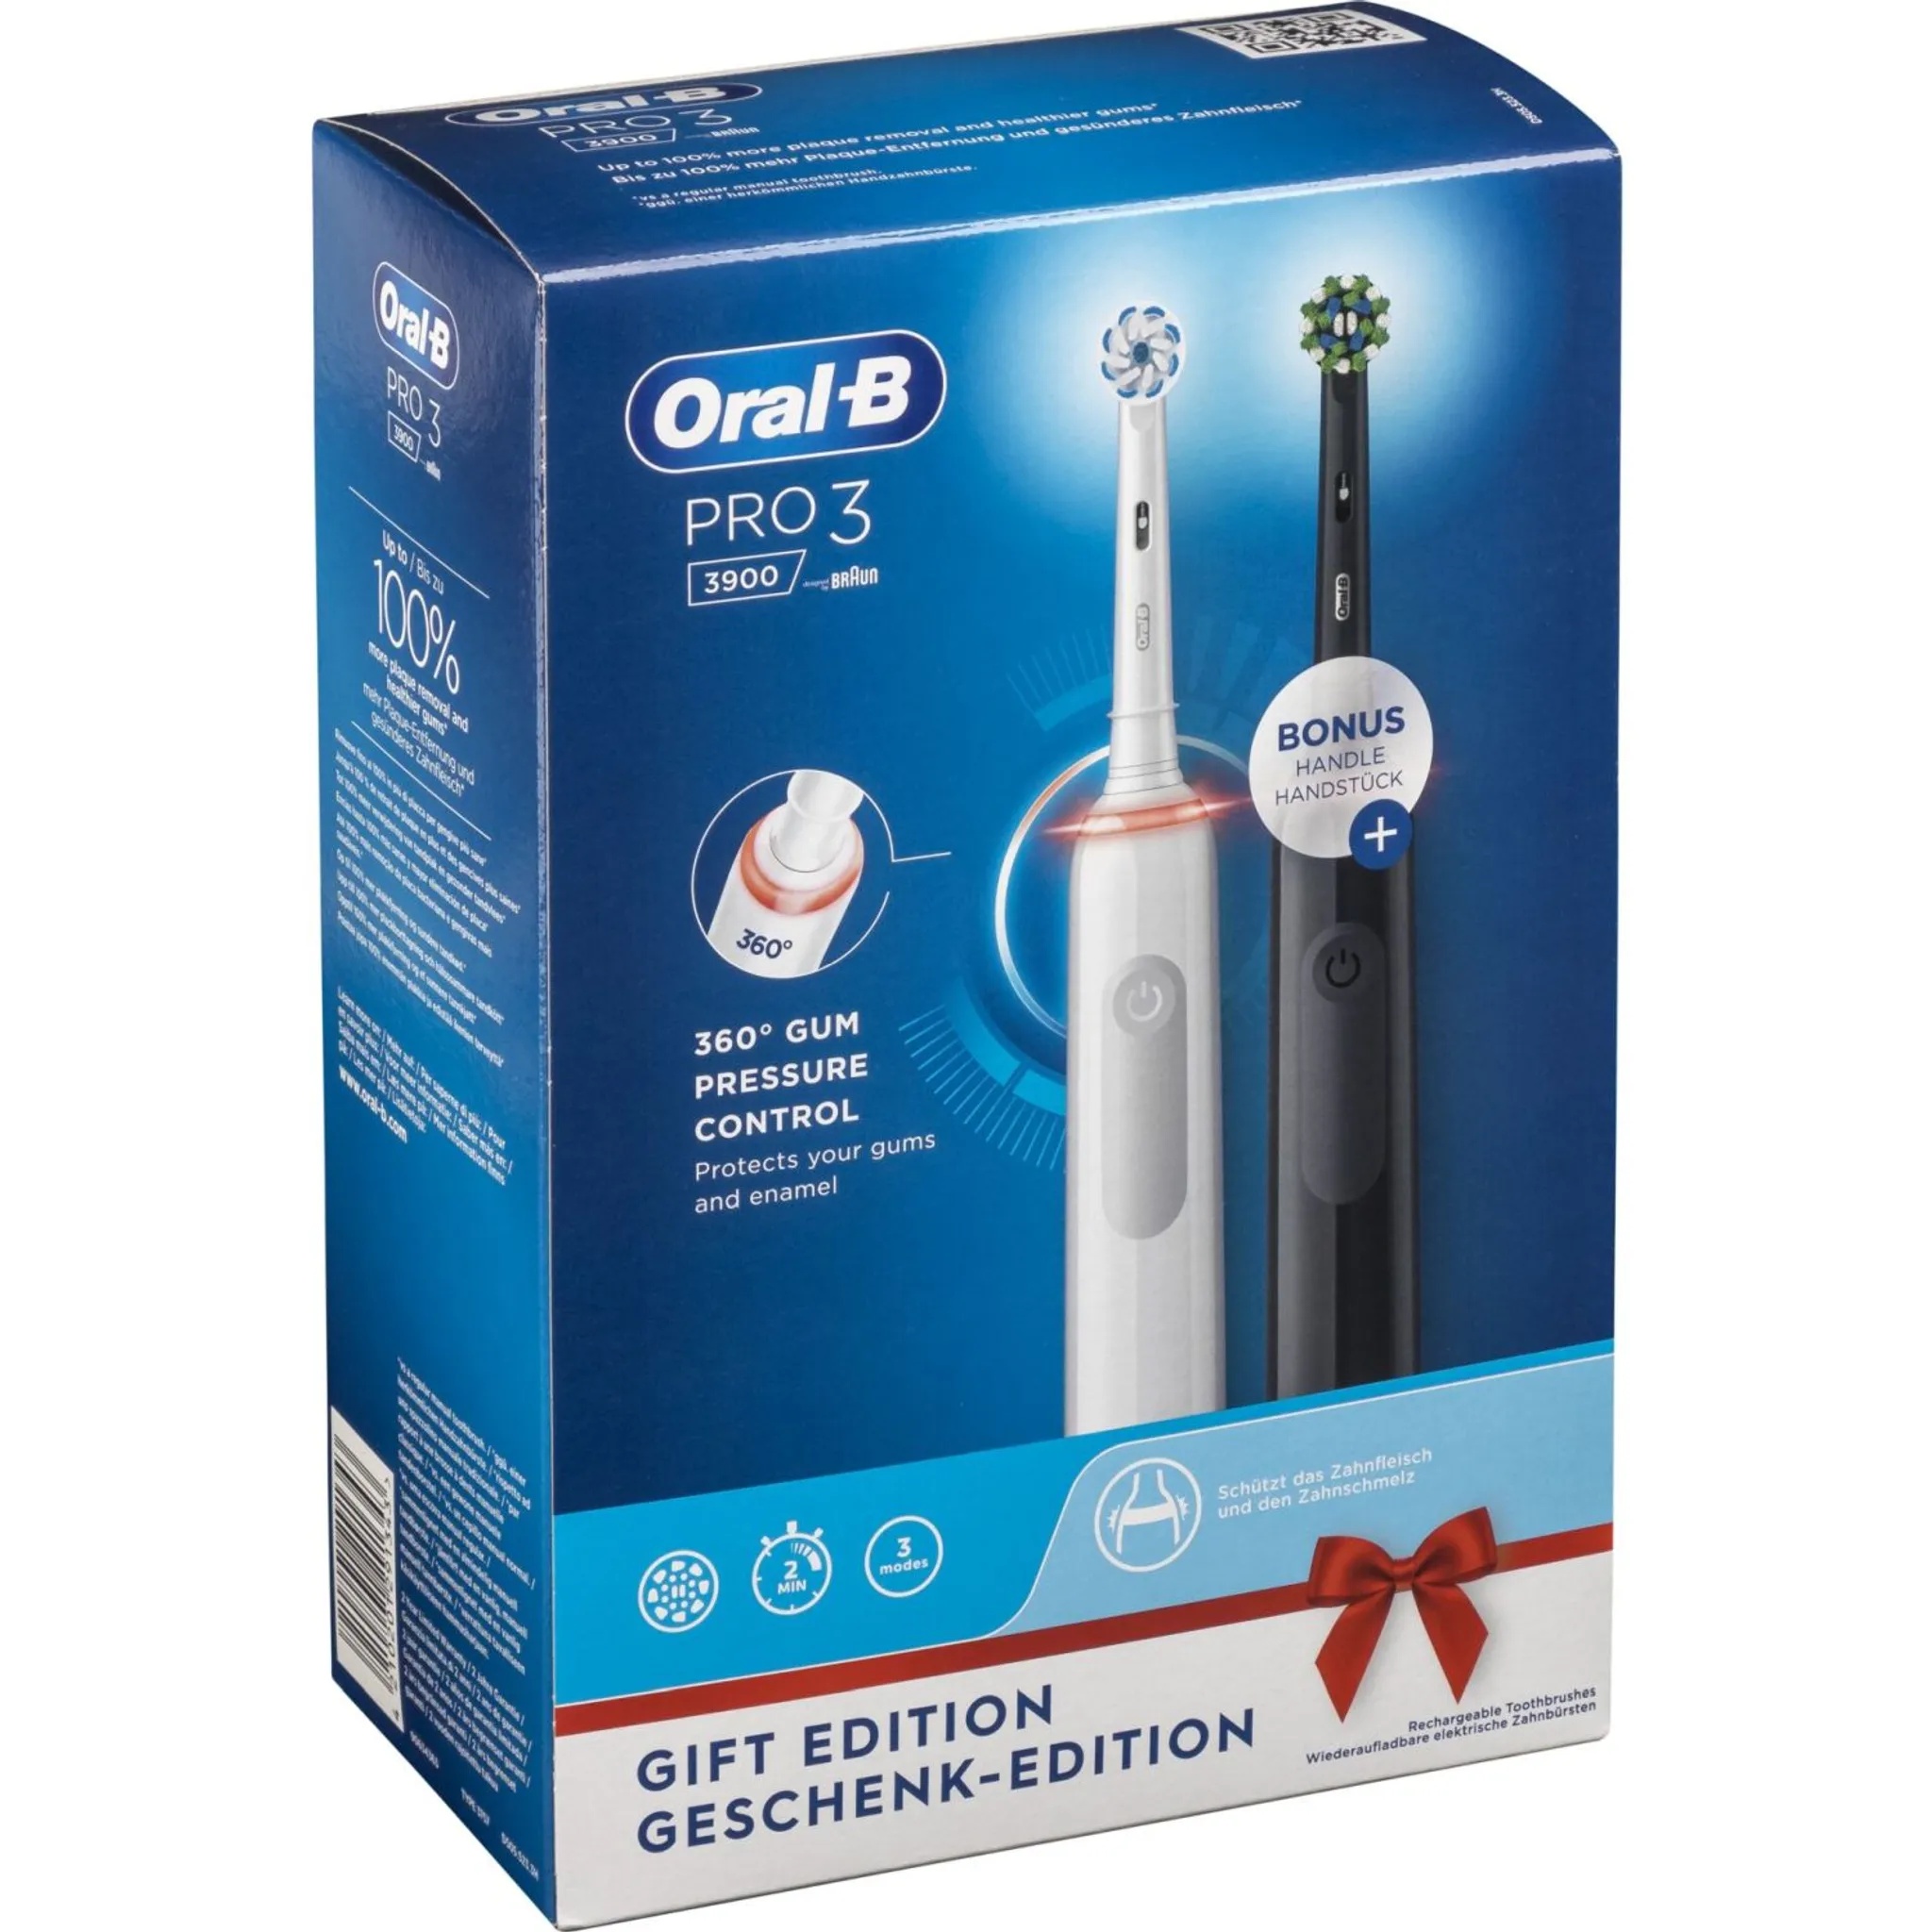 Oral-B PRO 3 3900 Duopack Edition Black-White